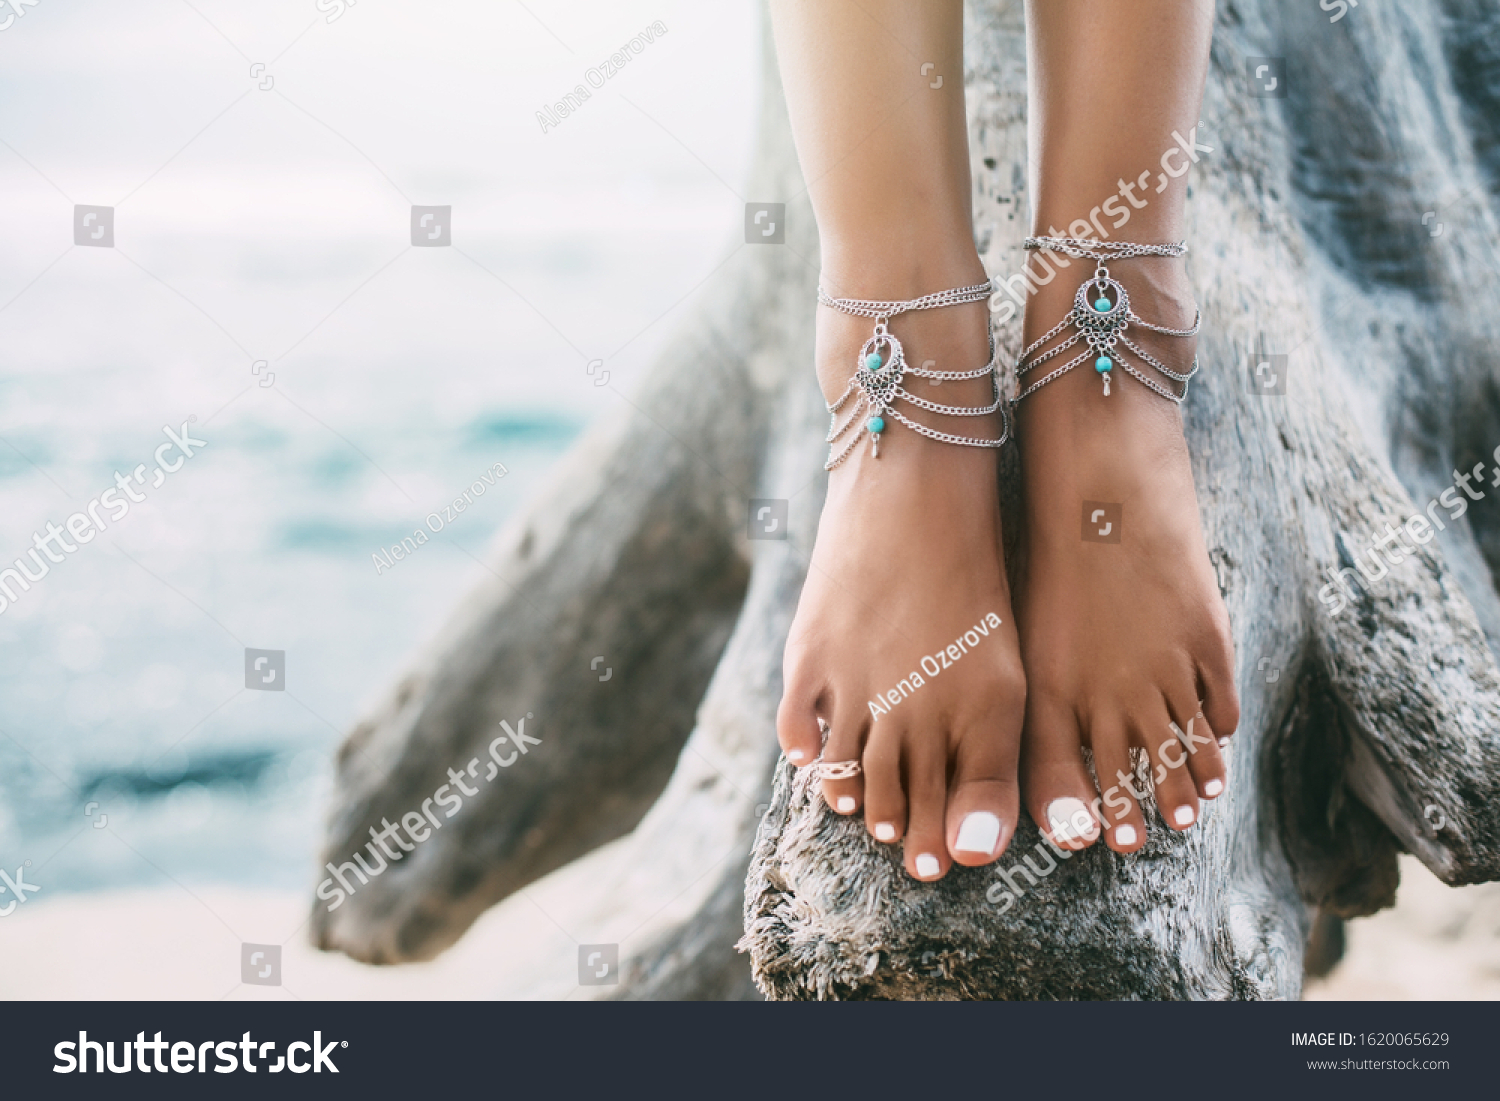 Boho styled girl wearing indian silver jewelry on the beach, tanned legs close up #1620065629